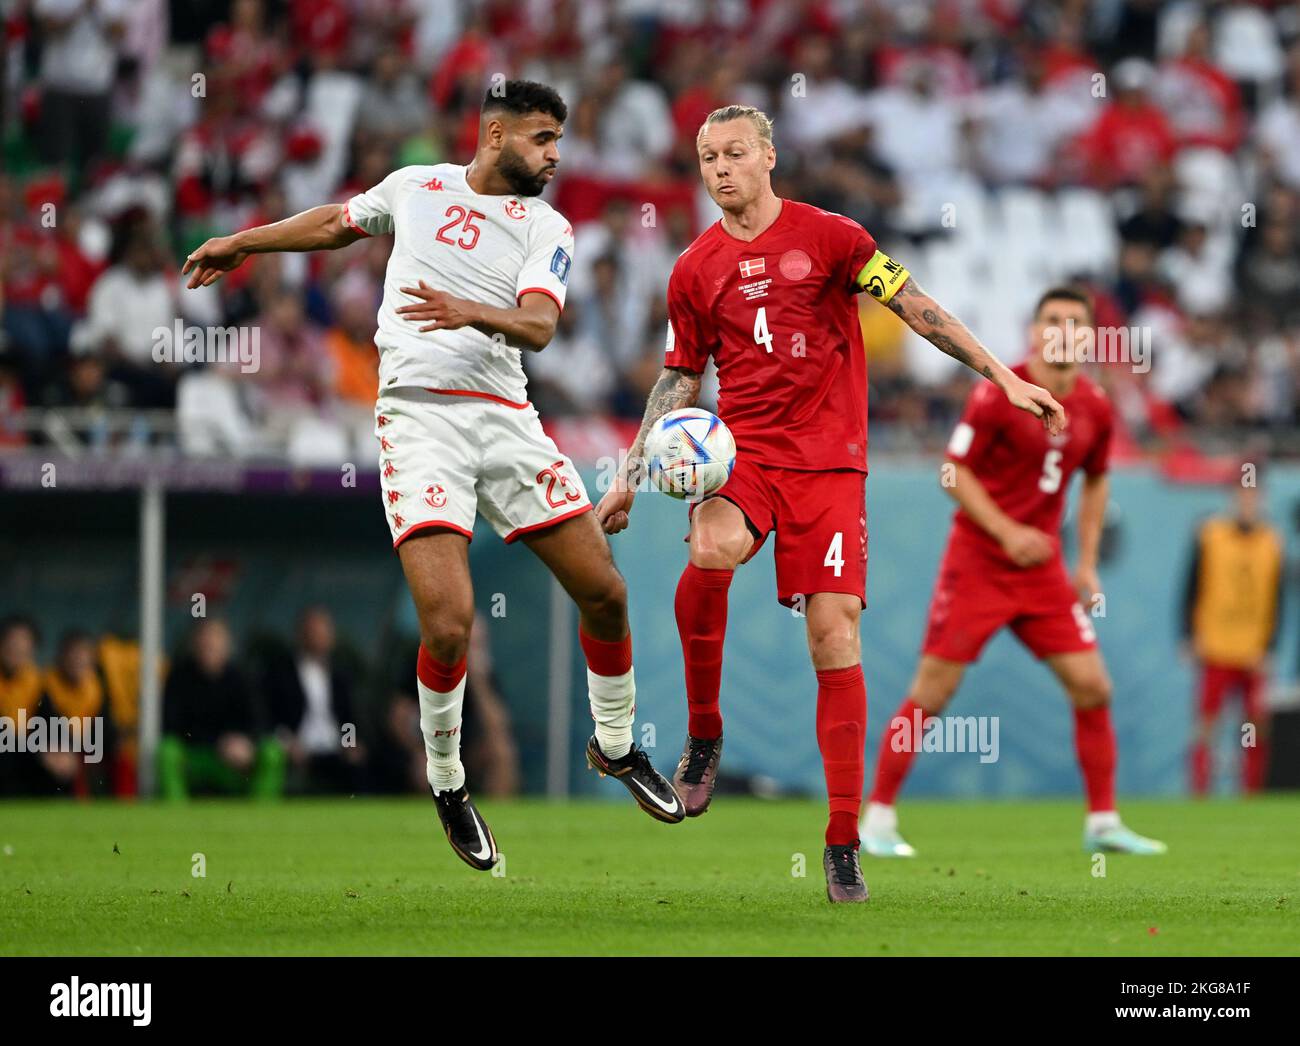 Al Rayyan, Qatar. 22nd Nov, 2022. Anis Ben Slimane (L) of Tunisia vies with Simon Kjaer of Denmark during the Group D match between Denmark and Tunisia at the 2022 FIFA World Cup at Education City Stadium in Al Rayyan, Qatar, Nov. 22, 2022. Credit: Xia Yifang/Xinhua/Alamy Live News Stock Photo